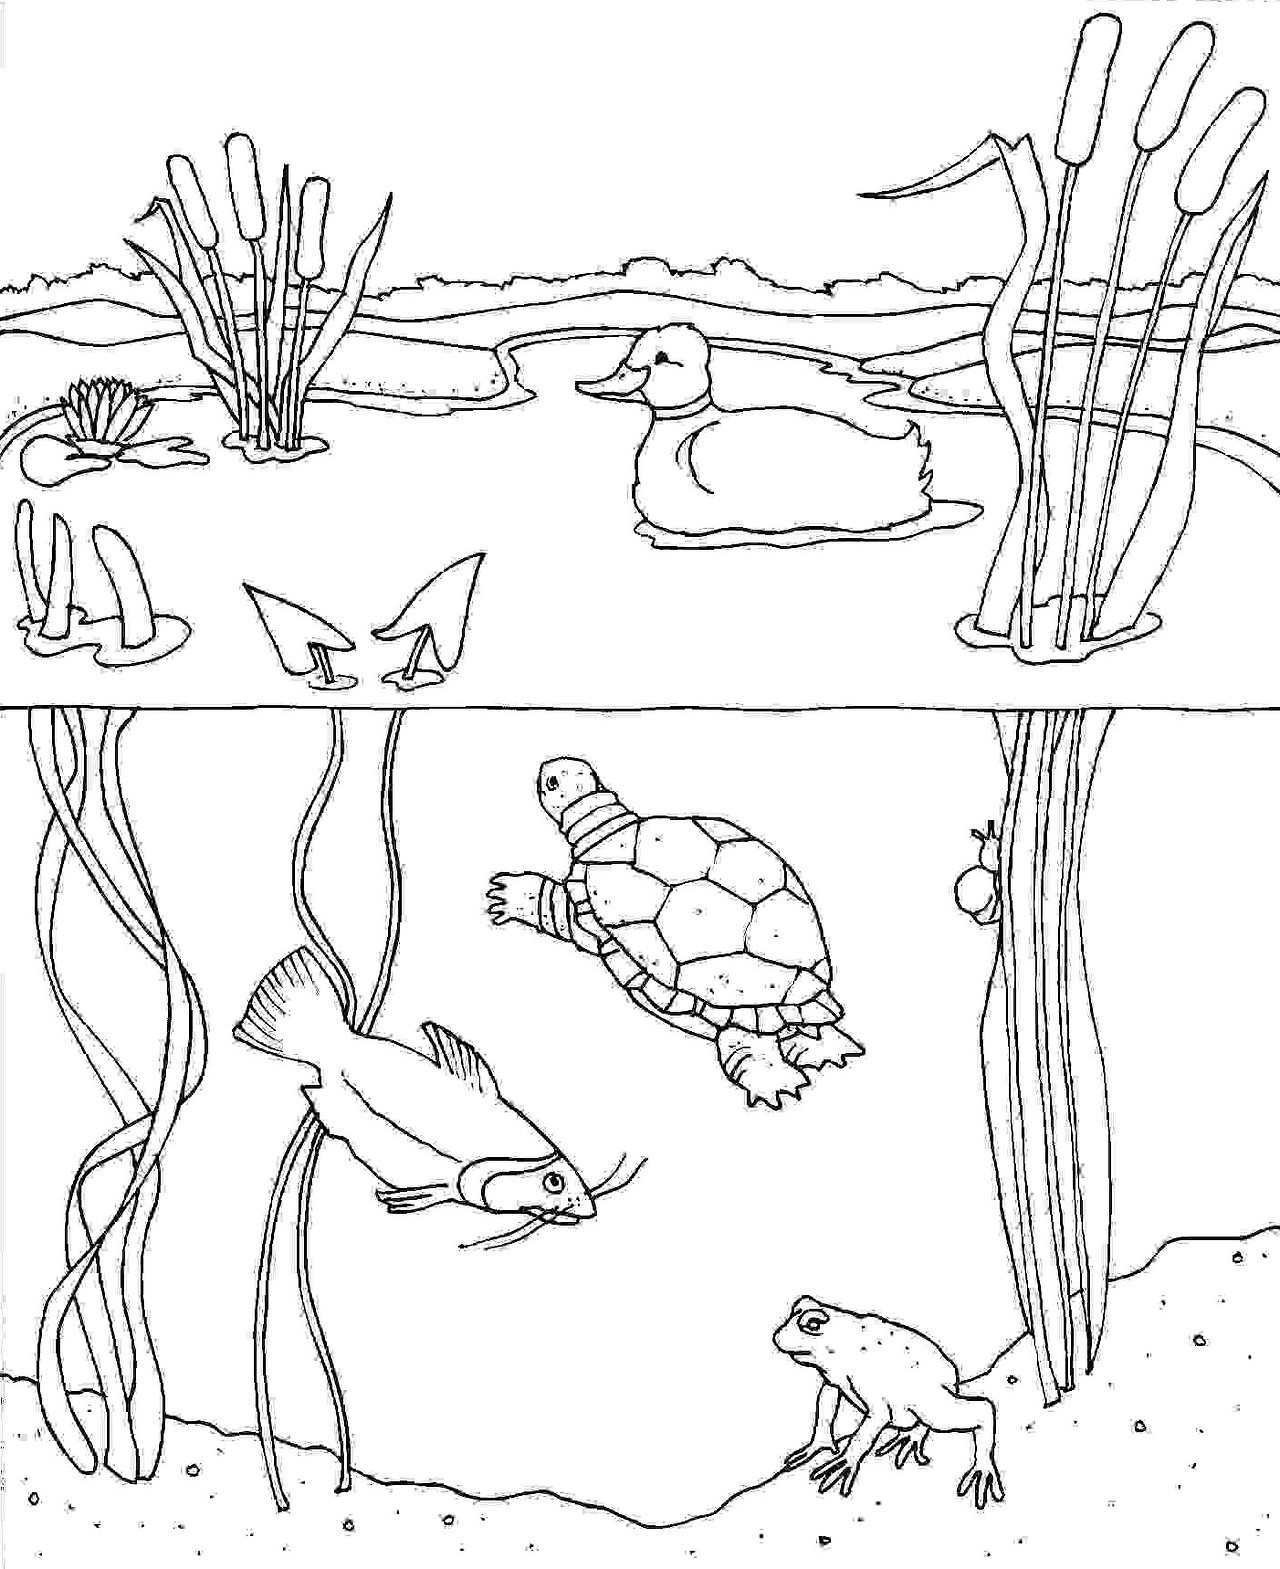 Coloring Pages : Nature Books For Children Playhouse Disney ...